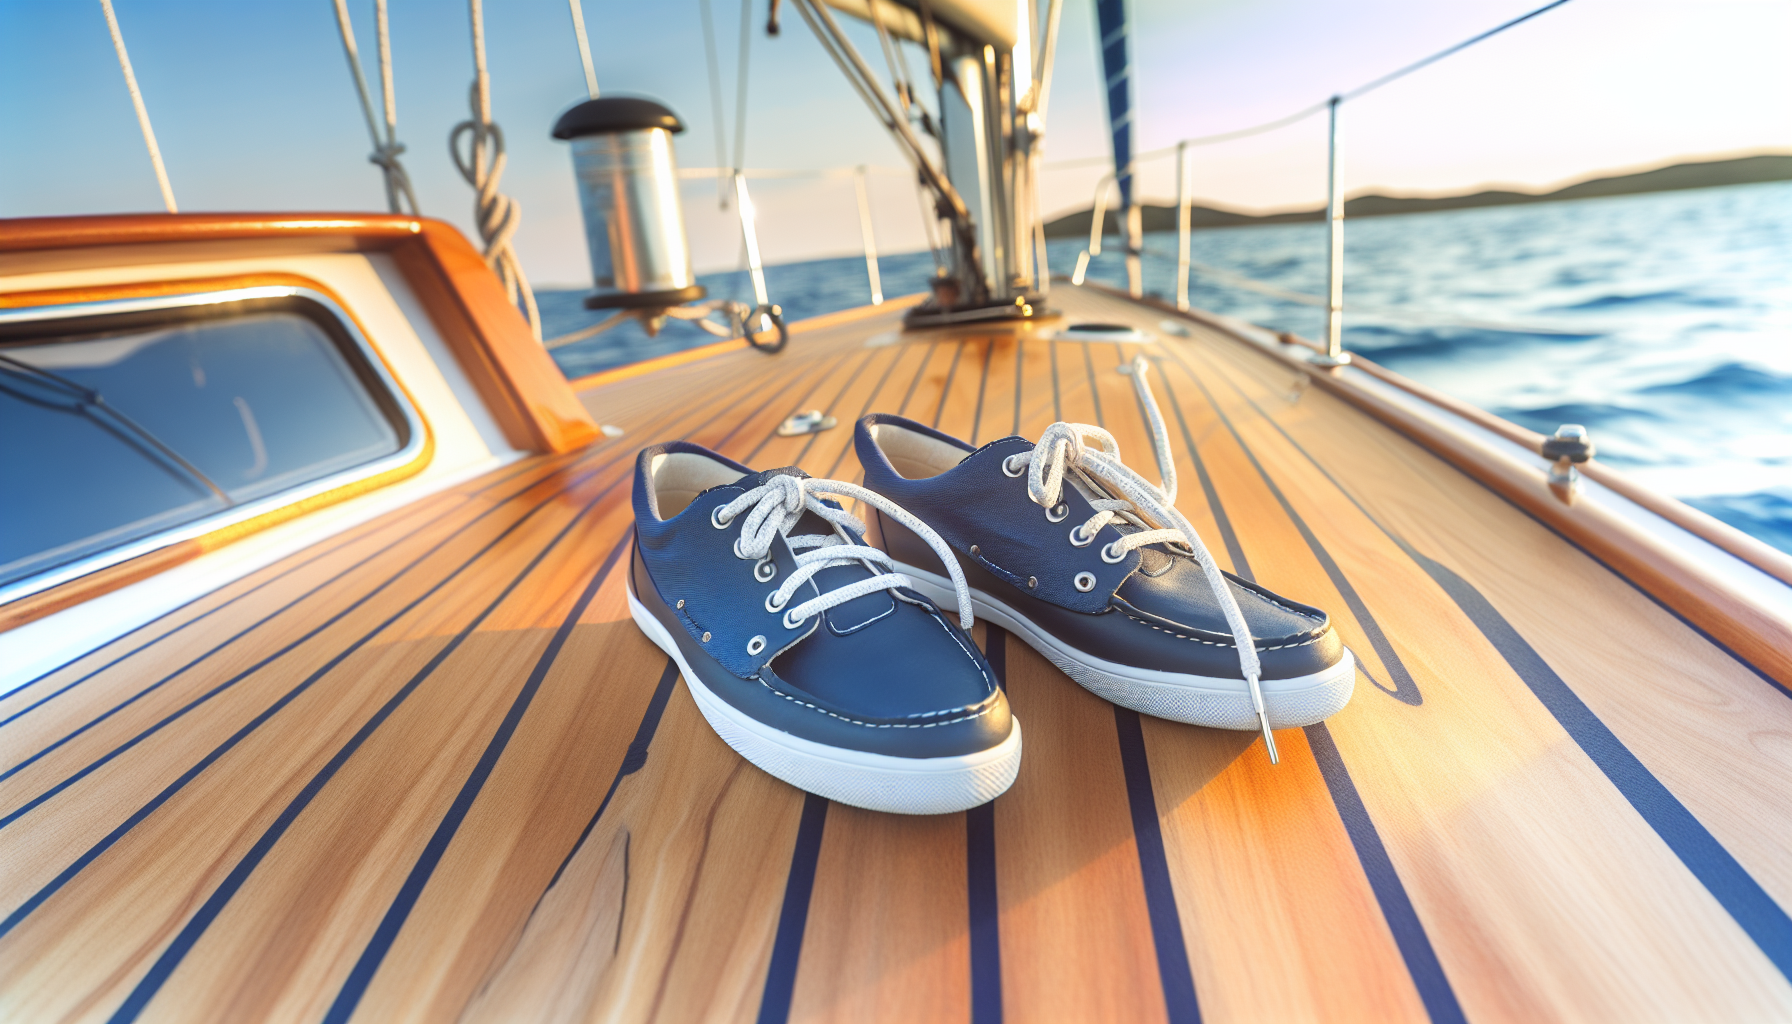 Women's sailing shoes on a boat